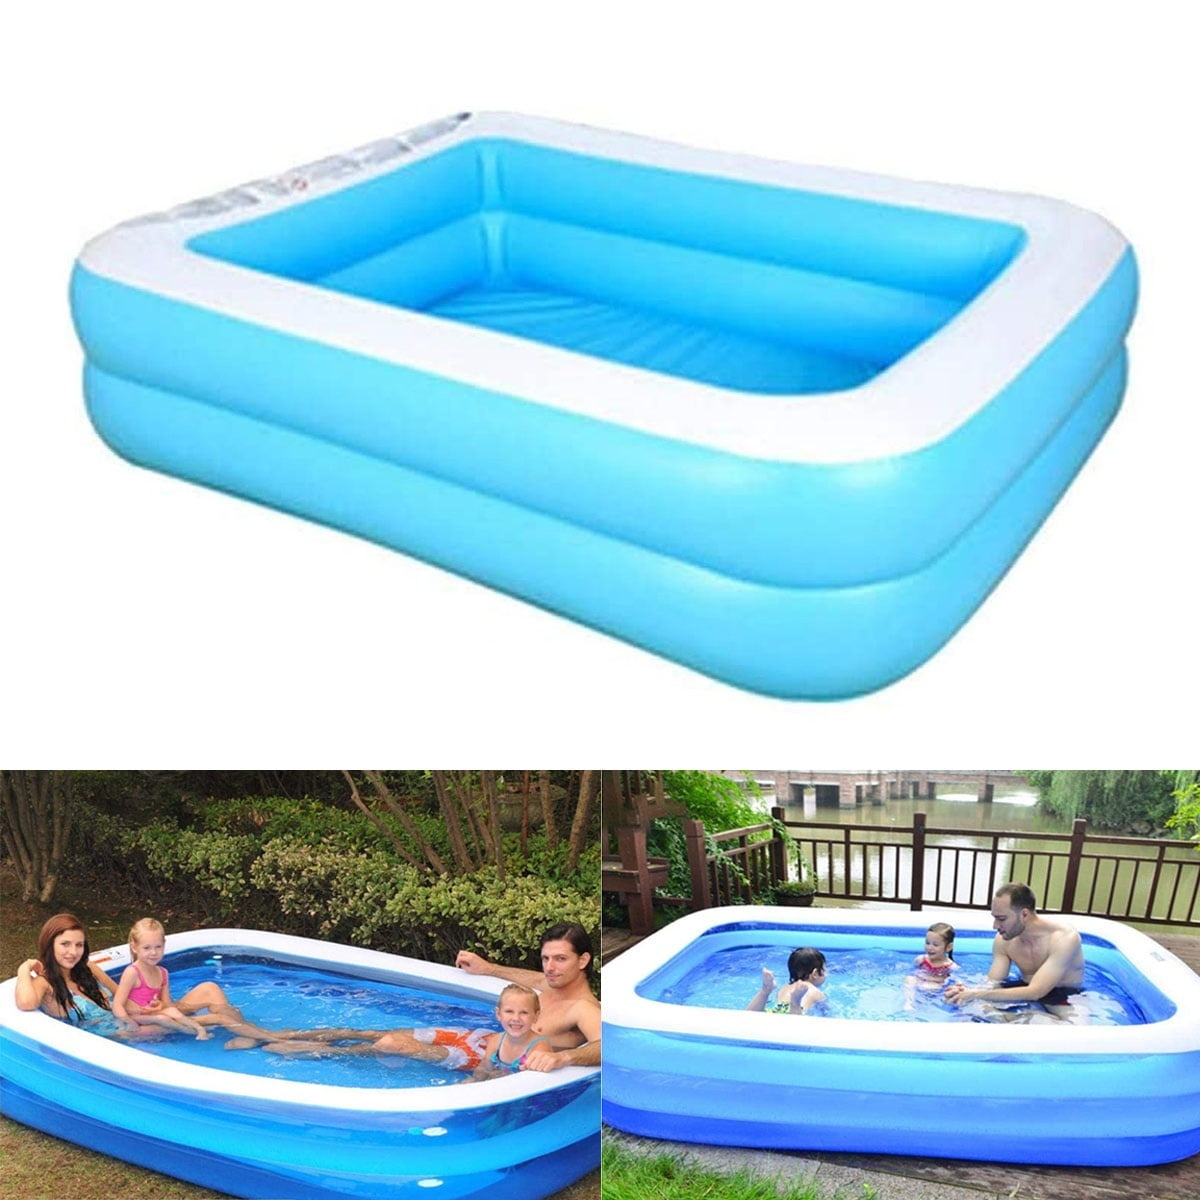 Details about   Summer Inflatable Family Kids Children Adult Play Bathtub Water Swimming Pool 